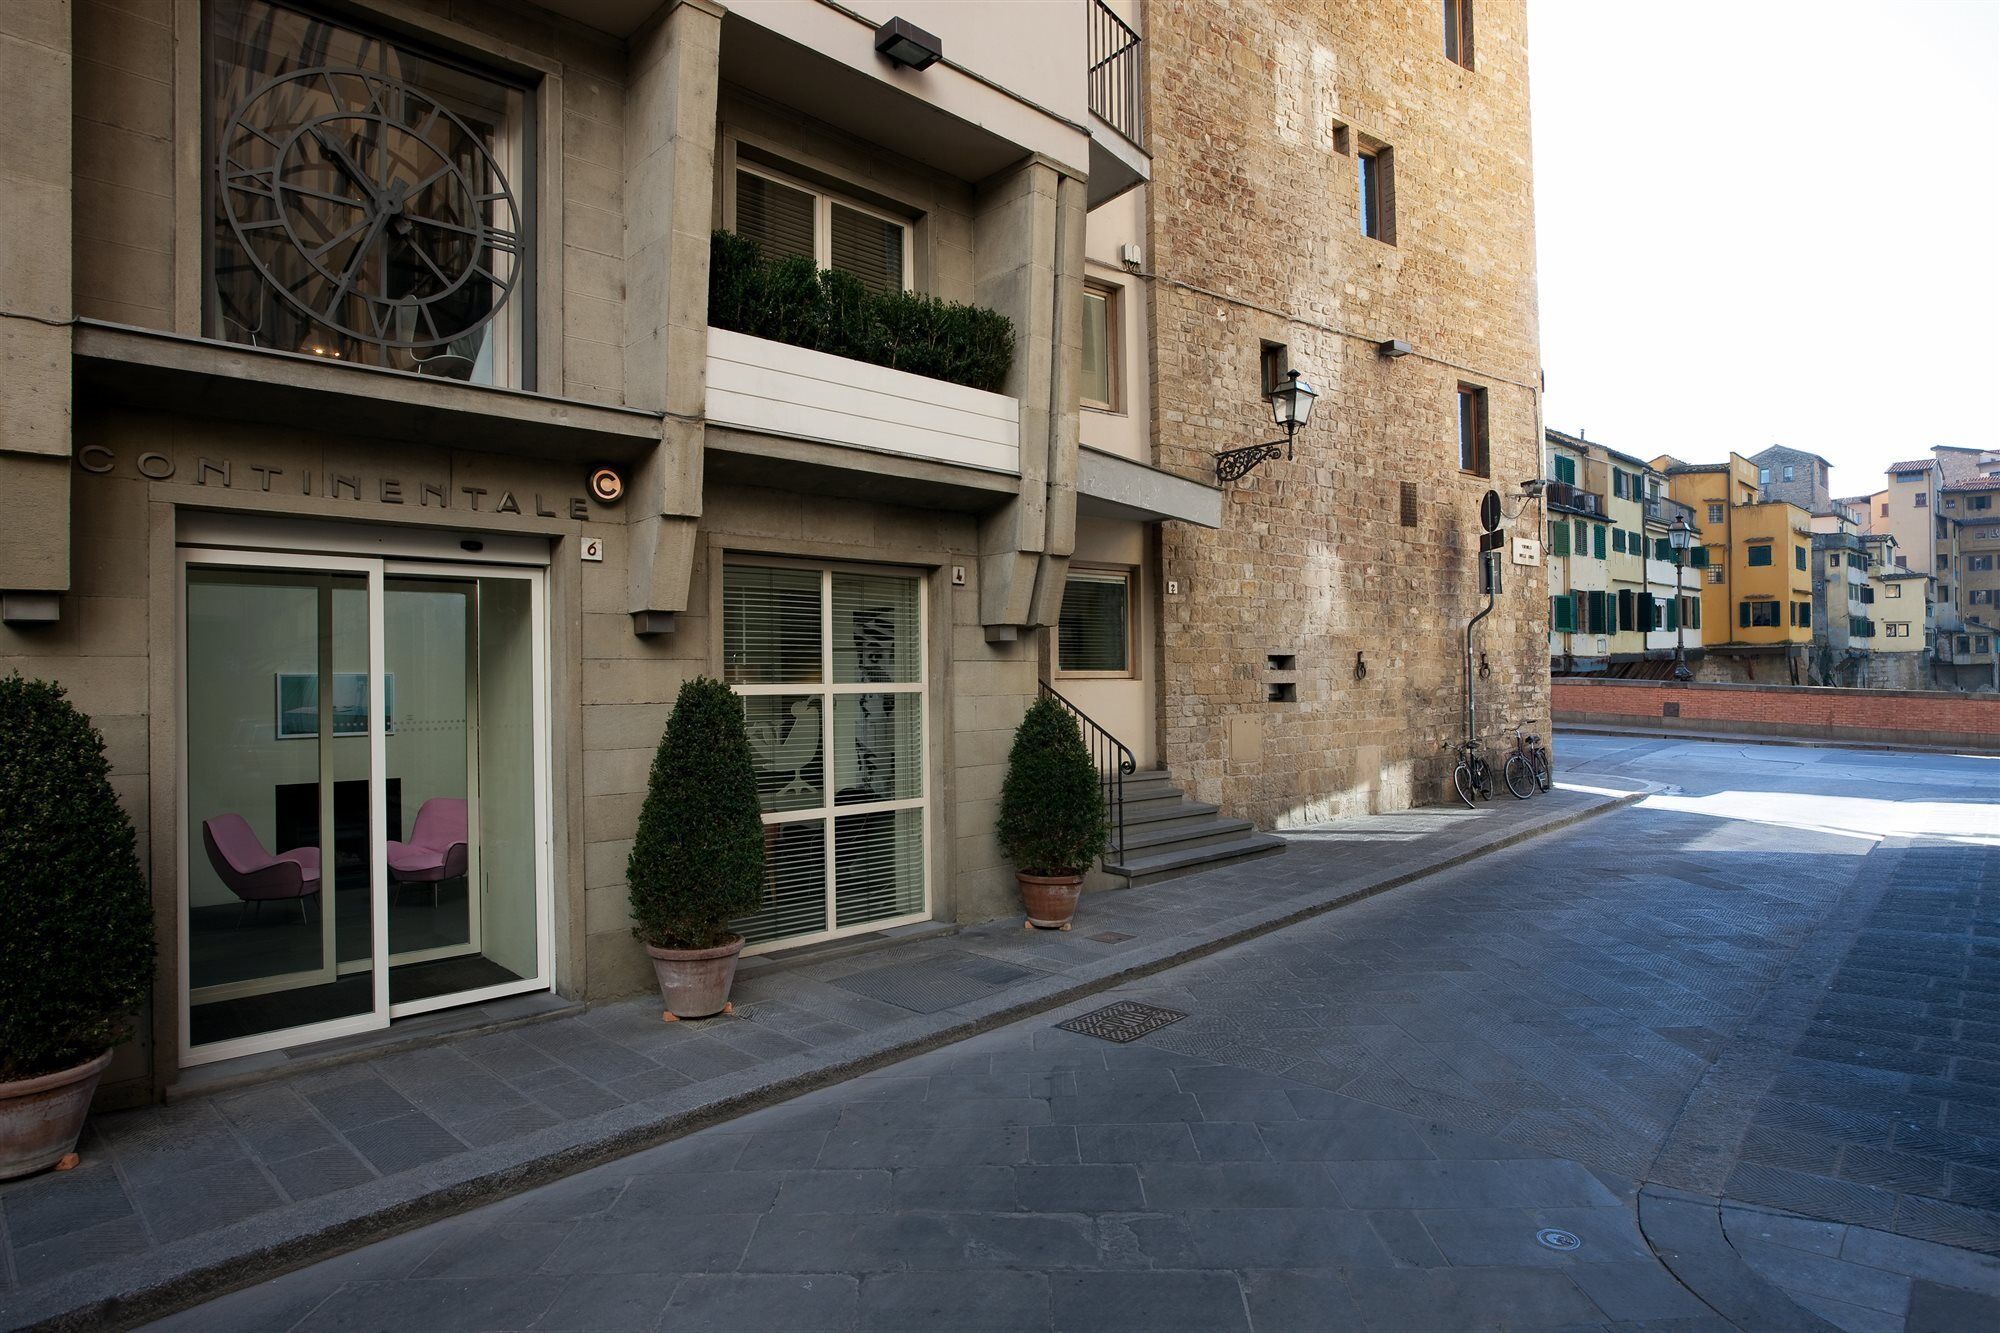 Hotel Continentale - Lungarno Collection Florence Exterior photo